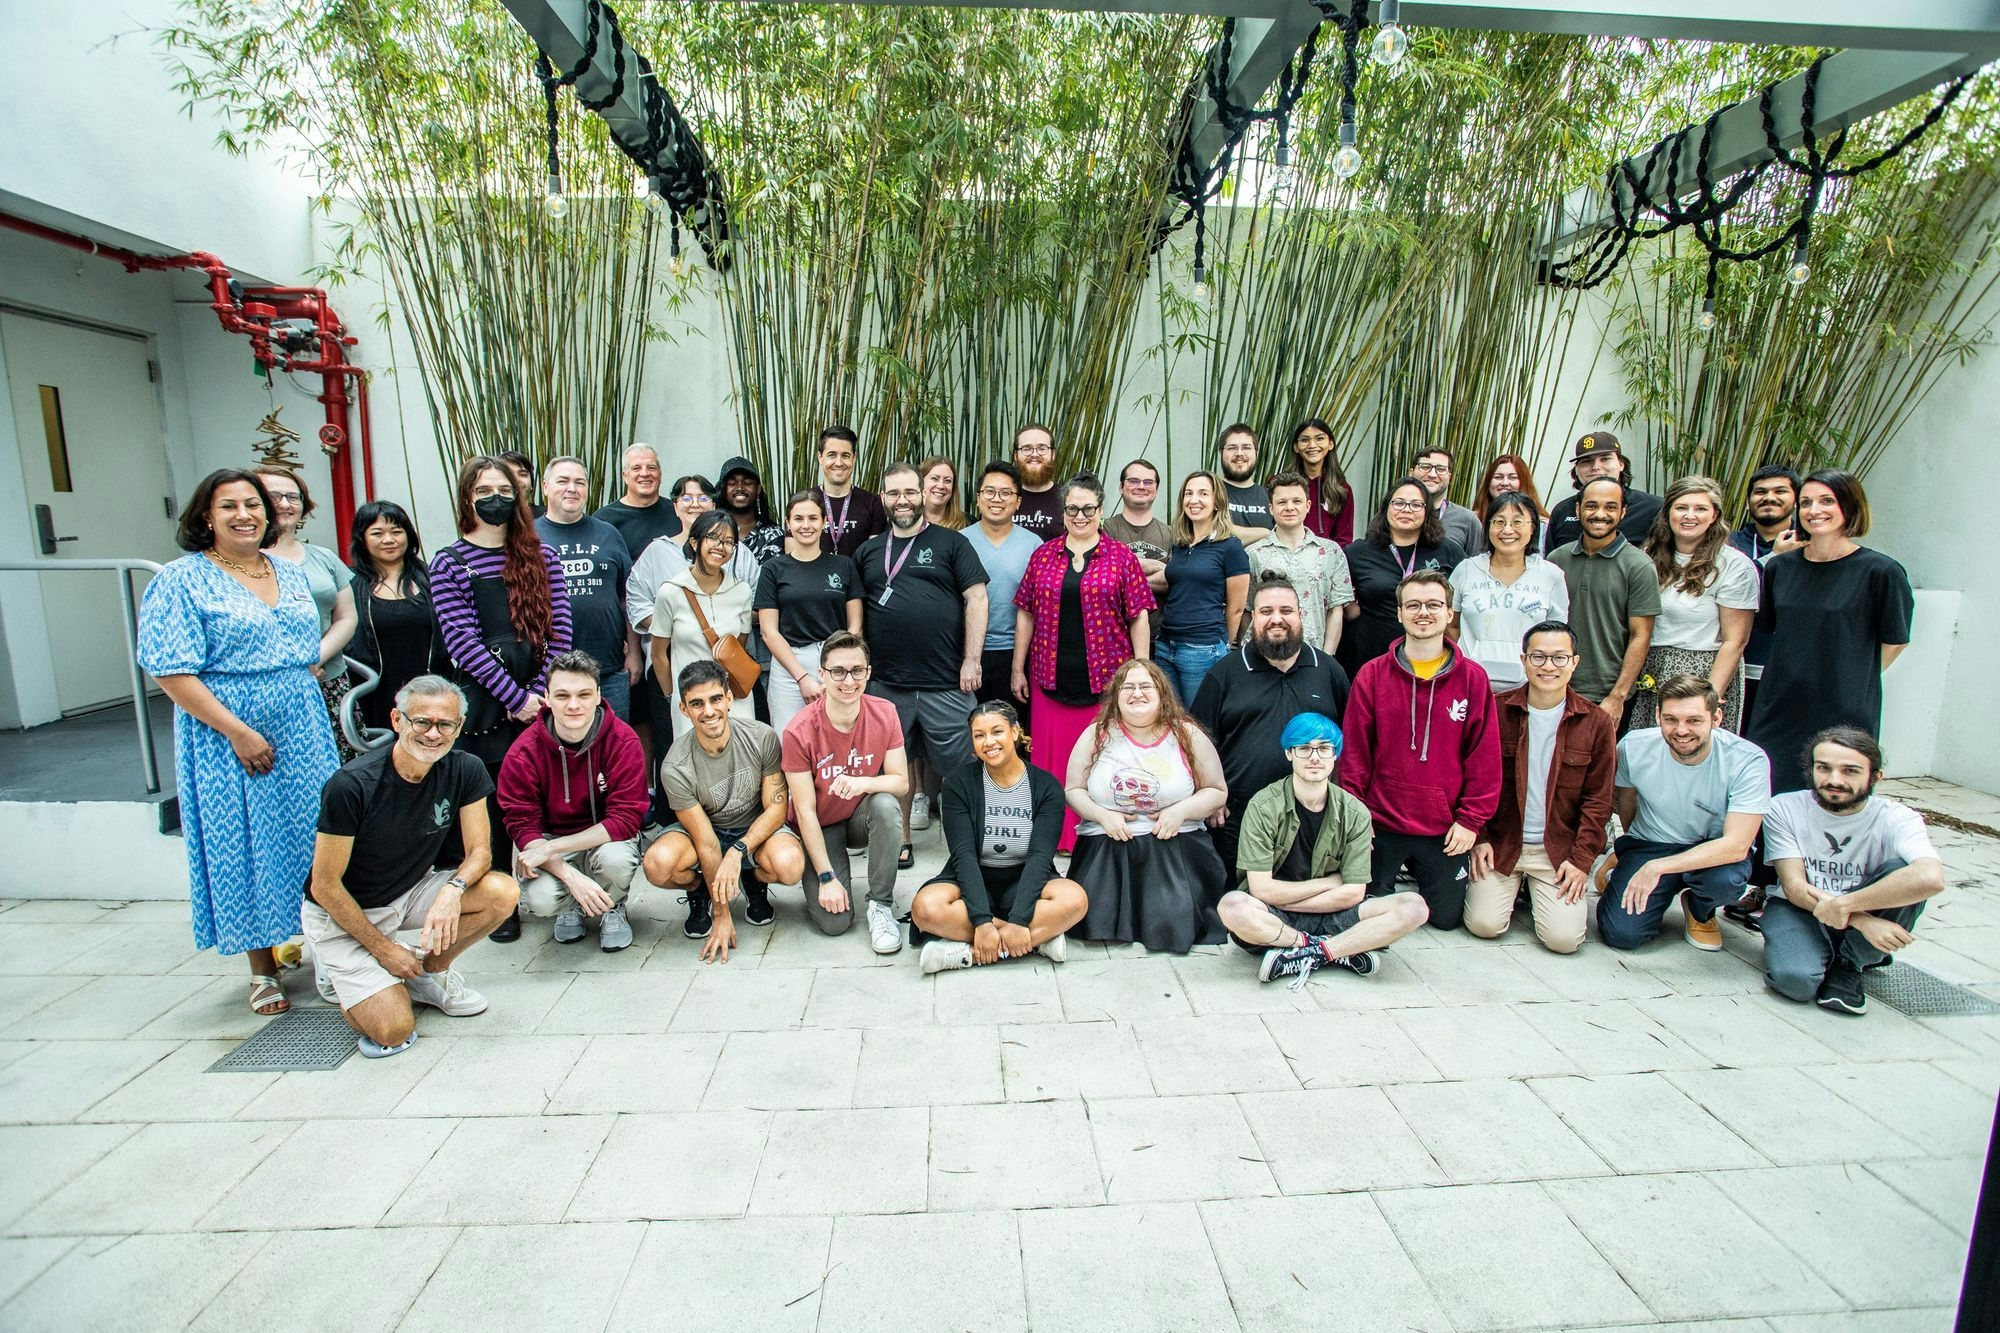 A group pfoto of Team Uplift at the Uplift Conference 2023. 43 people standing and kneeling for a group photo in a courtyard surrounded by green bamboo plants, everyone is smiling.. 